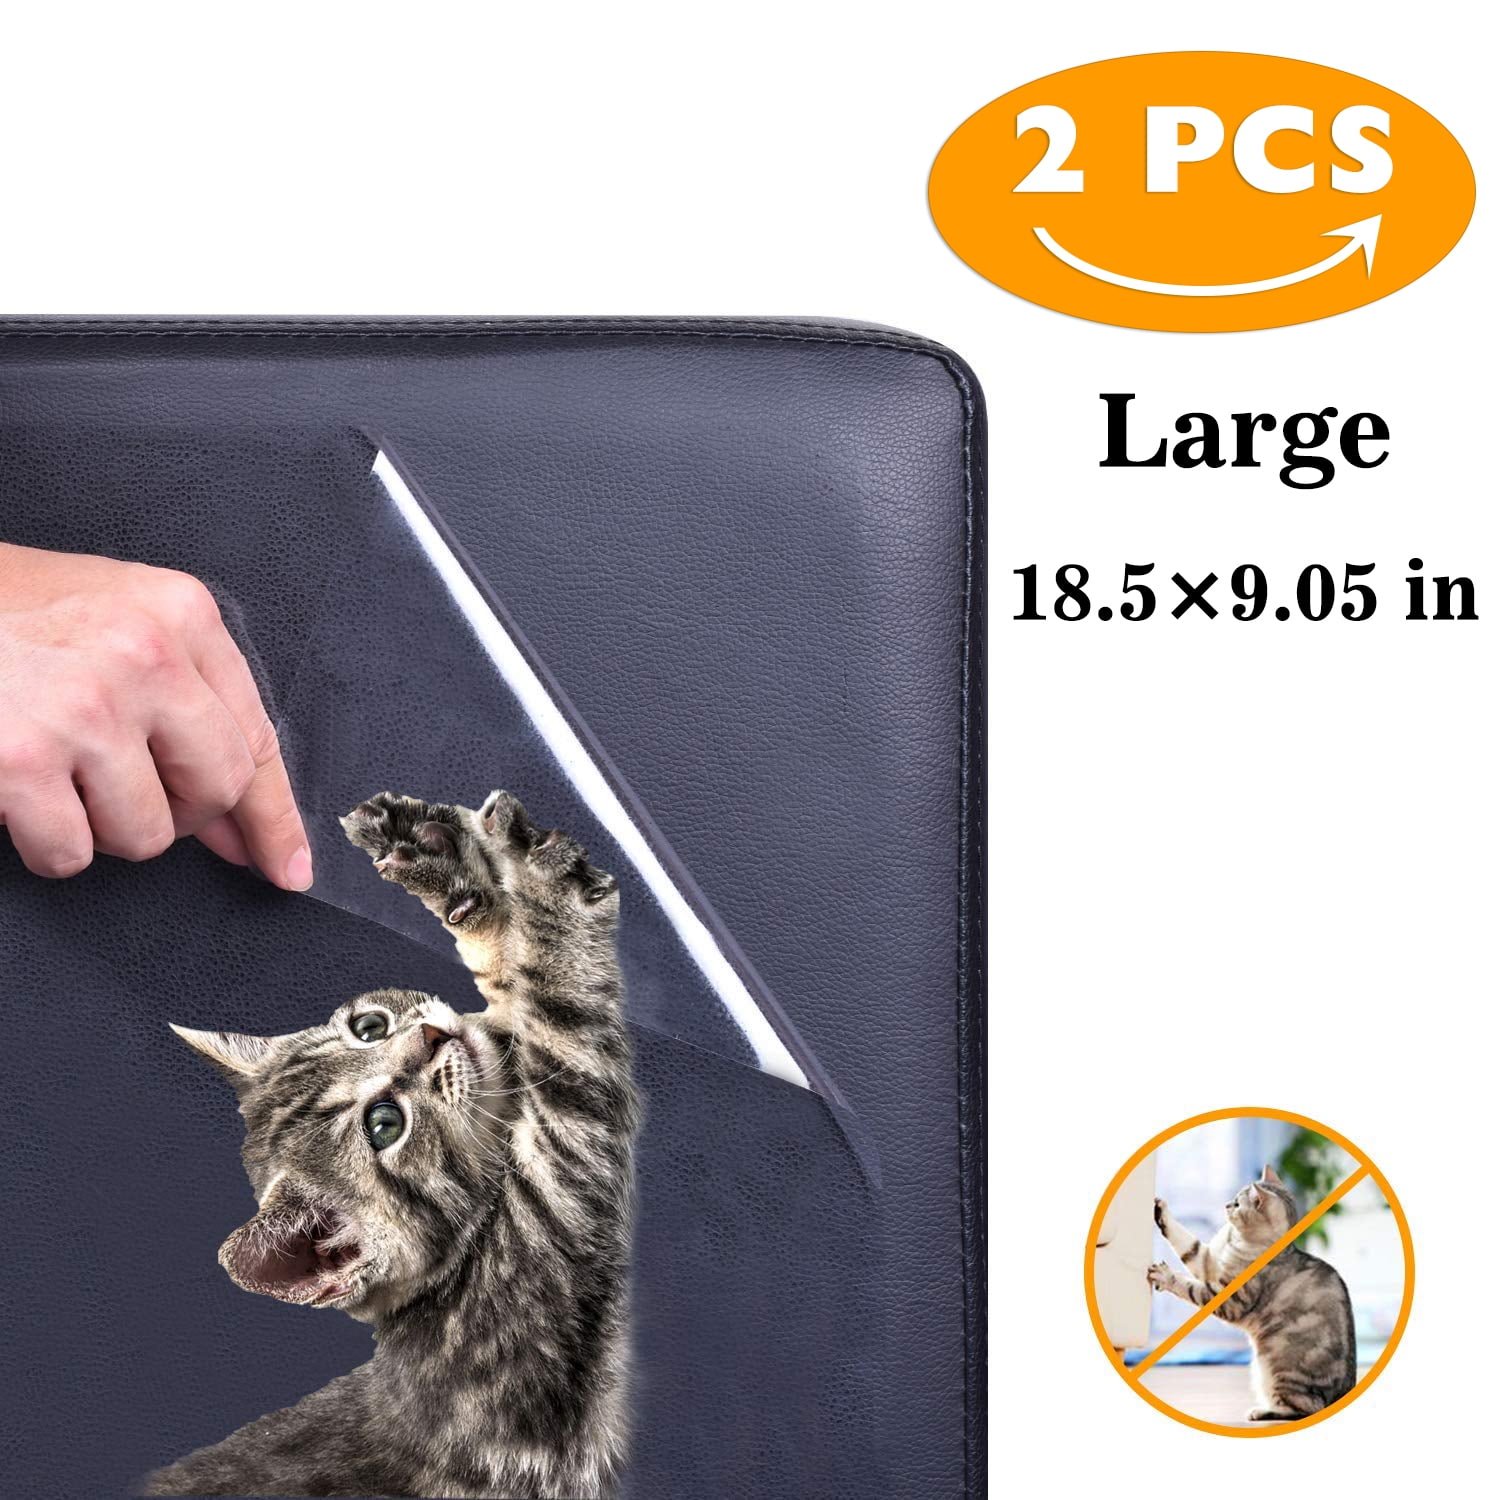 Cat Furniture Protector Scratch Guards Transparent with Pins for Protecting upholstered Furniture Sofa,16 L X 12 W 4 Pack Clear Cat Claw Guards Self-Adhesive Pads Cat Scratch Protector